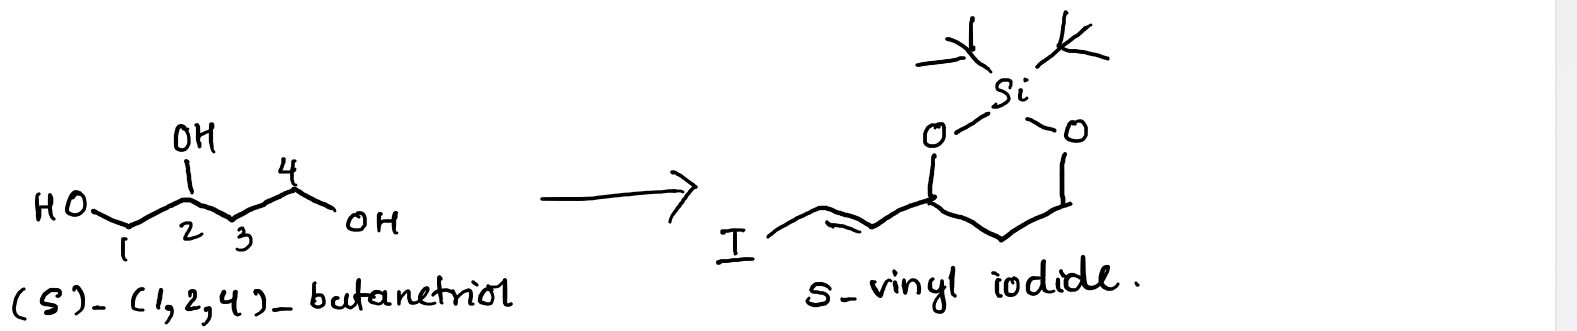 gyde Himmel rig Solved How to synthesize (S)-vinyl iodide from (S)-1,2,4 | Chegg.com